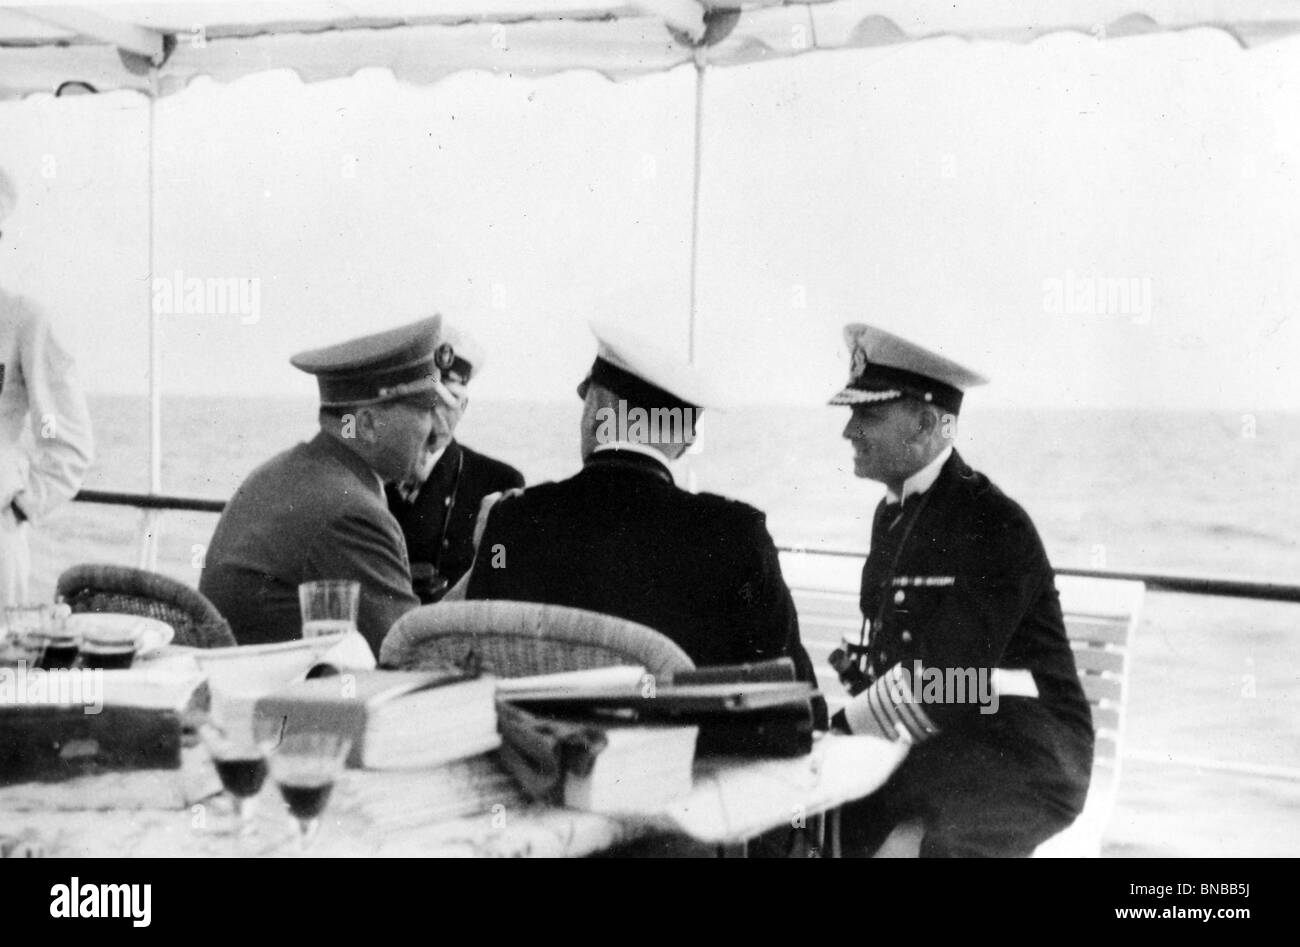 ADOLF HITLER at left with Naval Commanders including Karl Doenitz at right Stock Photo